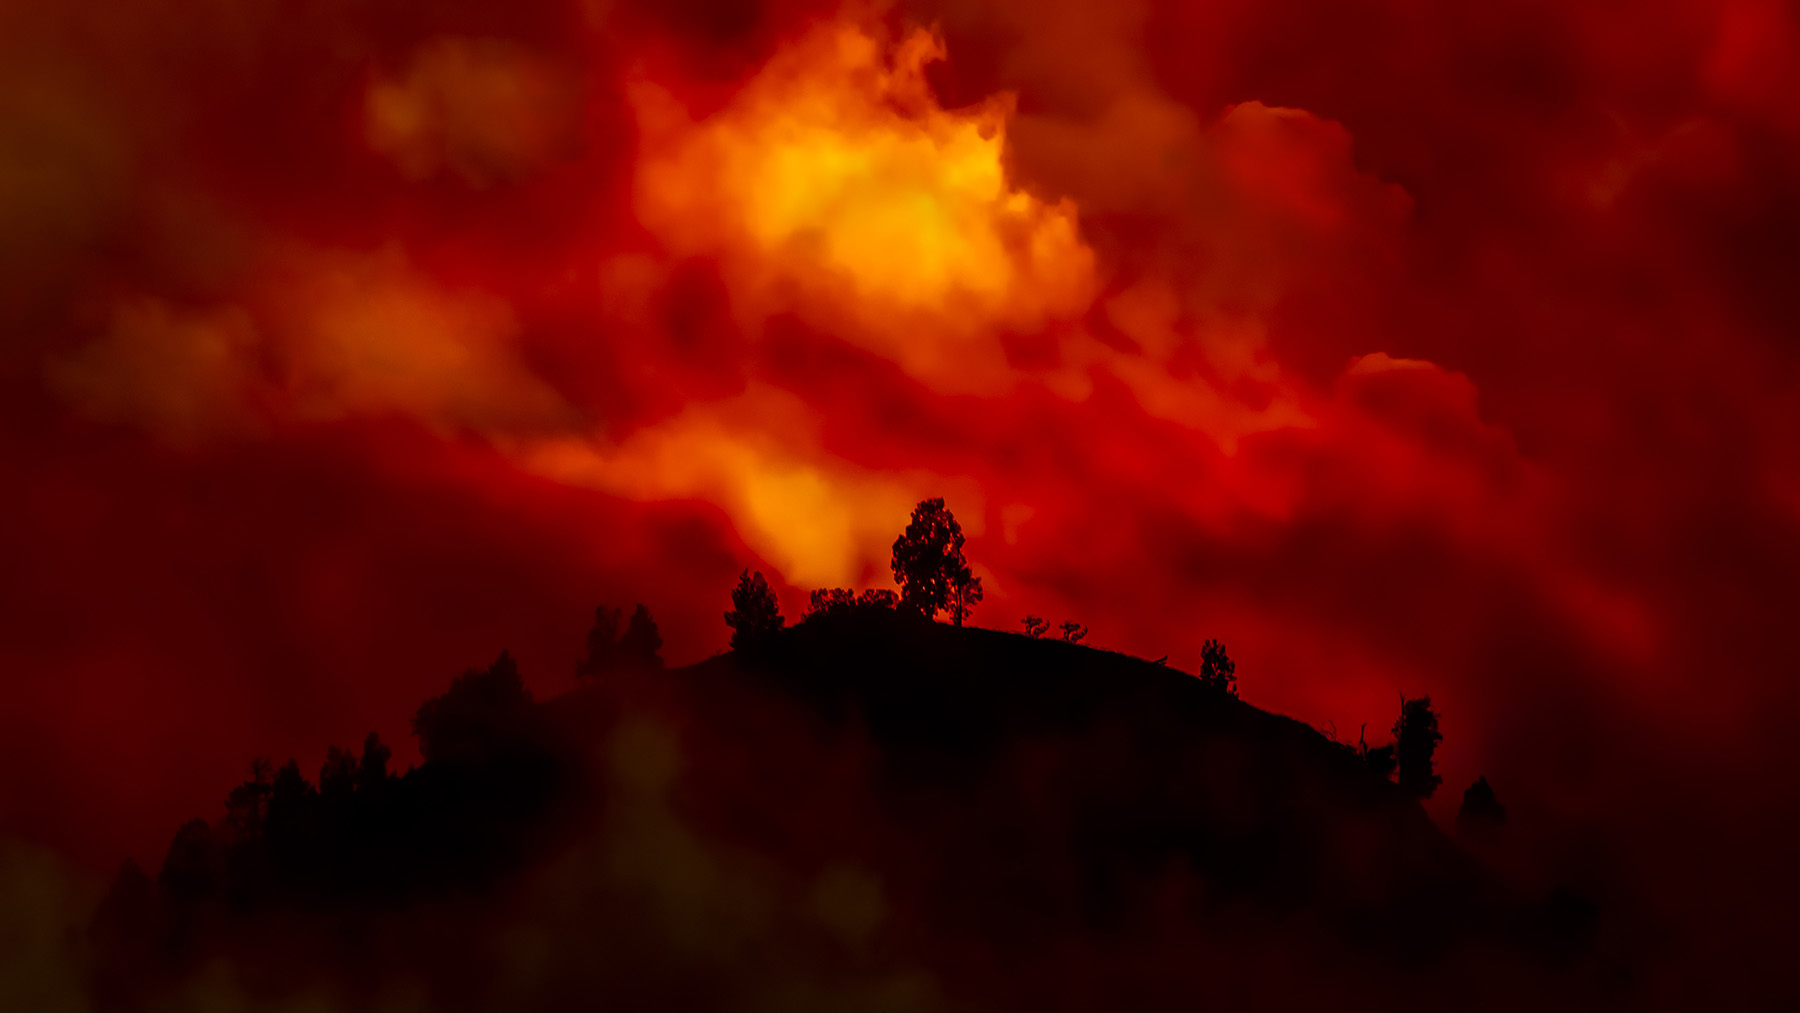 Landscape on fire at night